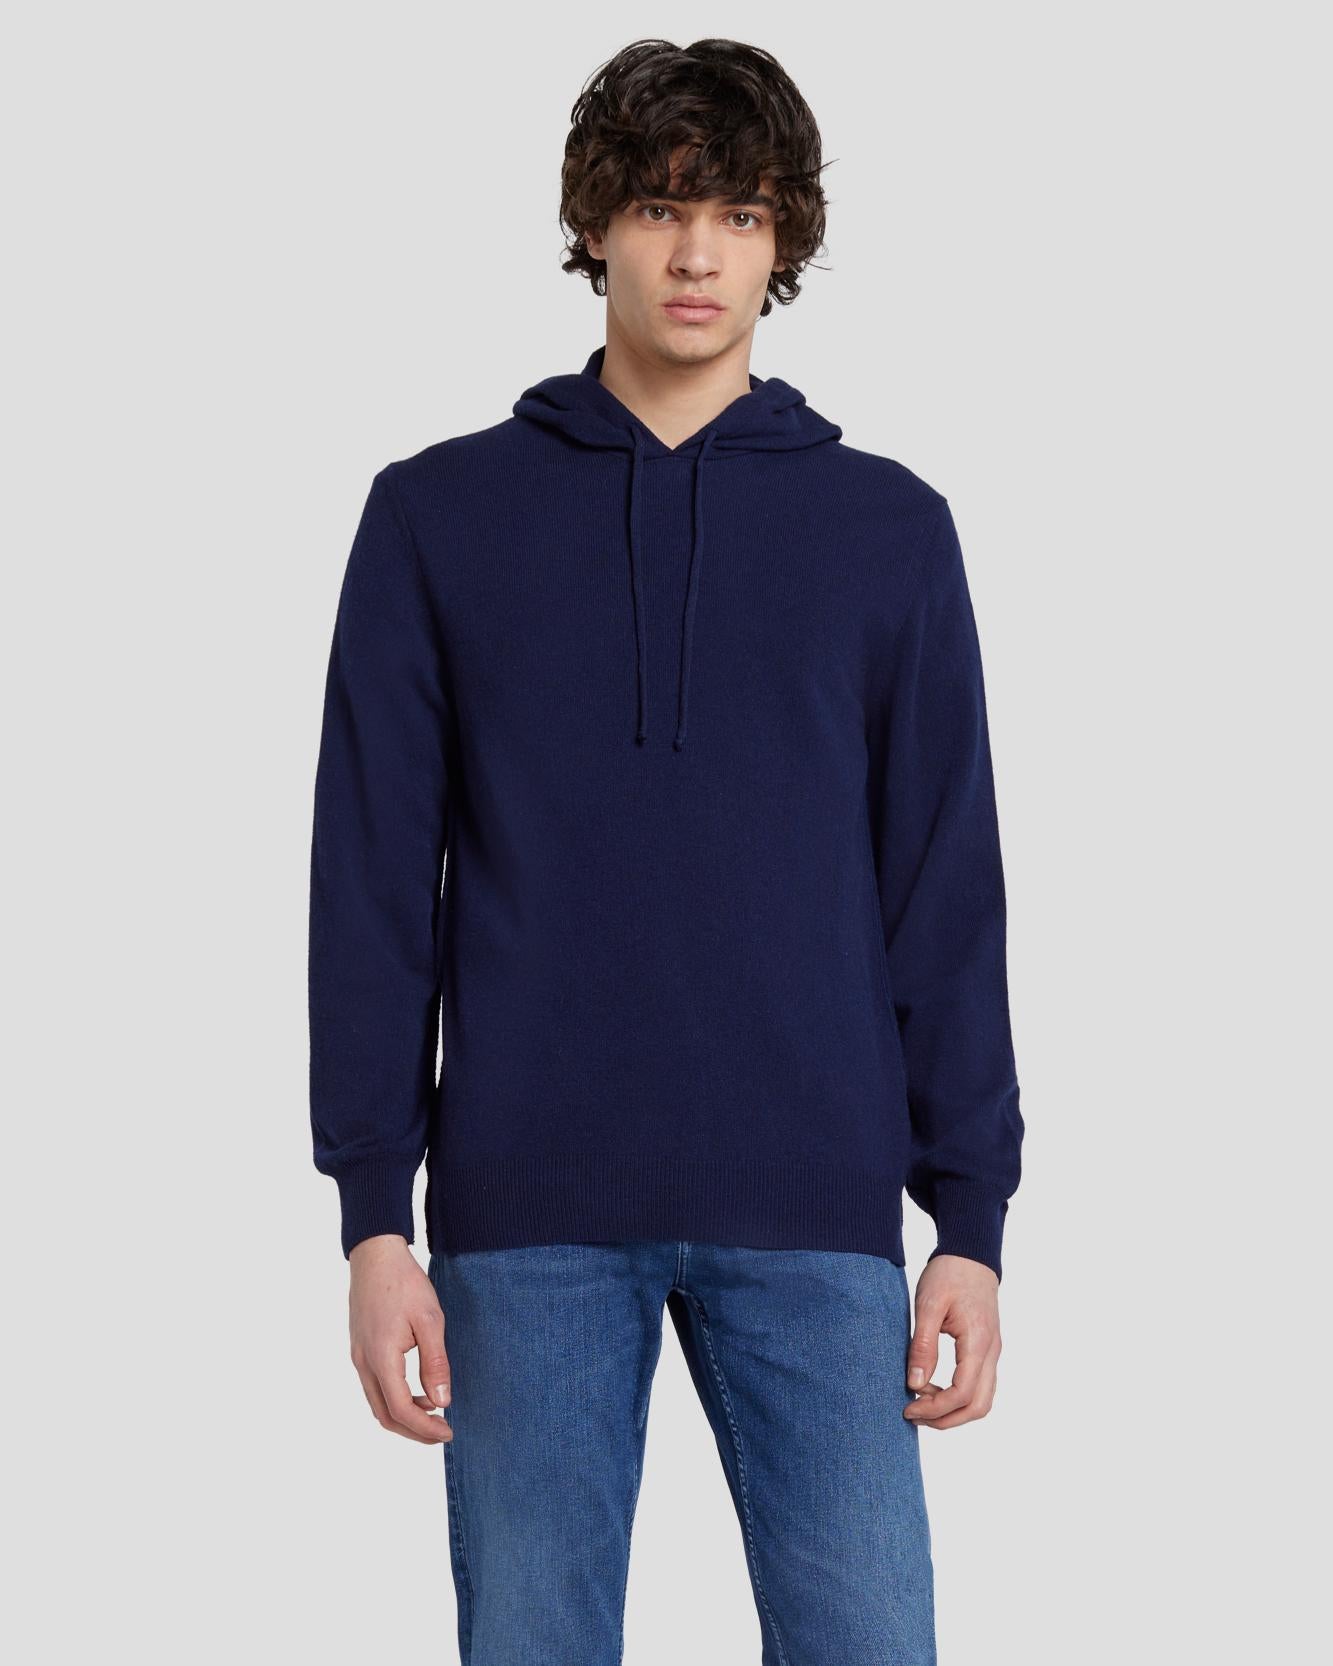 Cashmere Hoodie in Navy | 7 For All Mankind